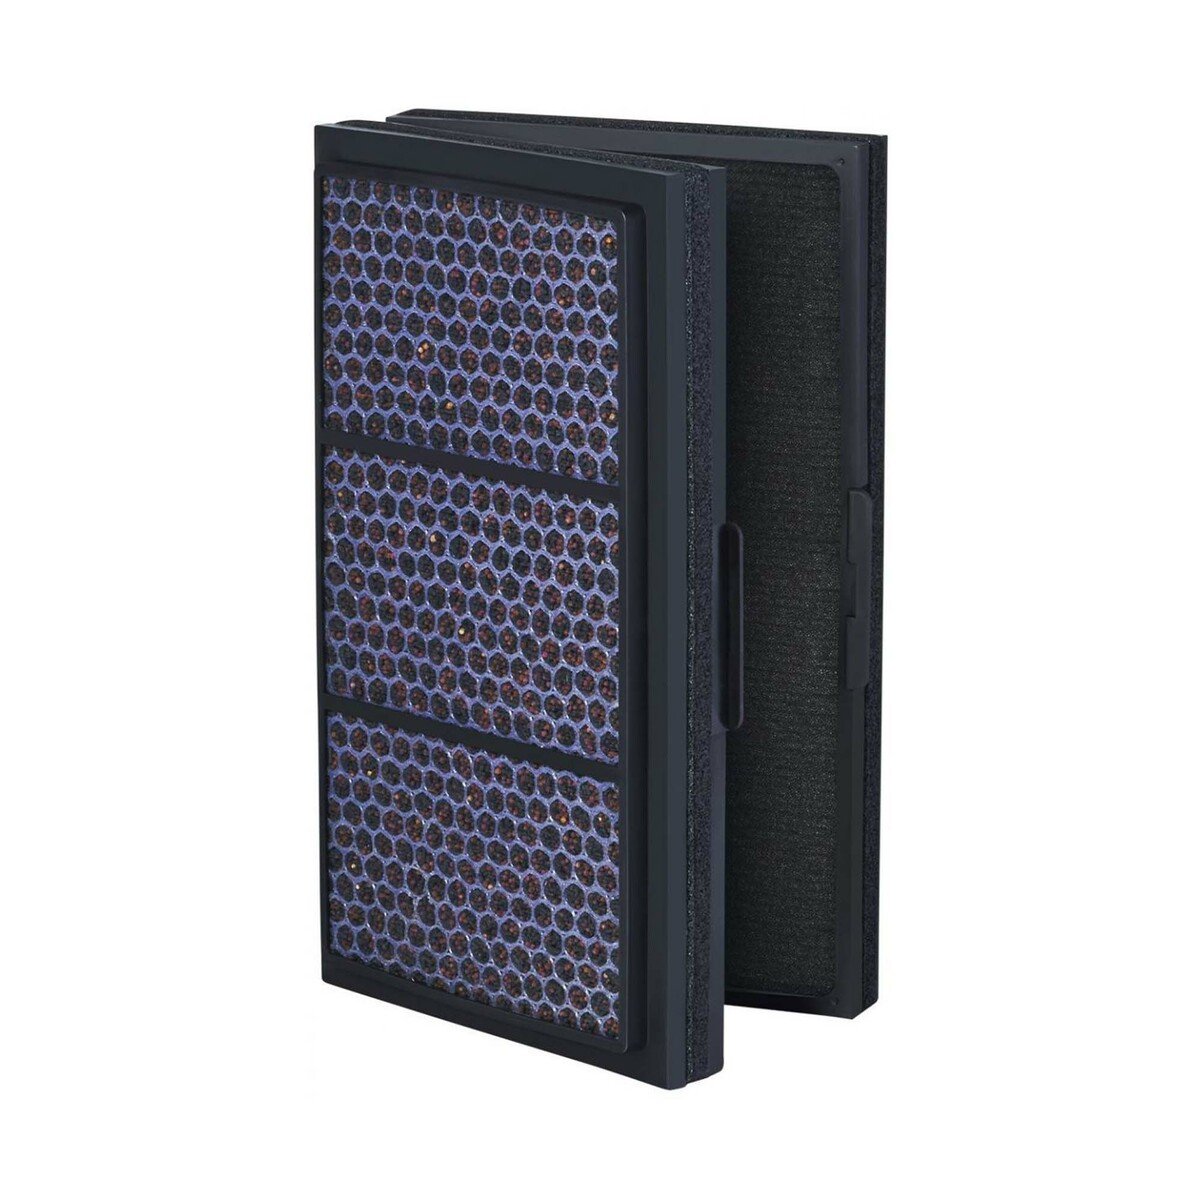 Blueair HEPASilent SmokeStop Filter For Pro Series Compatible With Pro M, Pro L, and Pro XL - Black - FPROSM